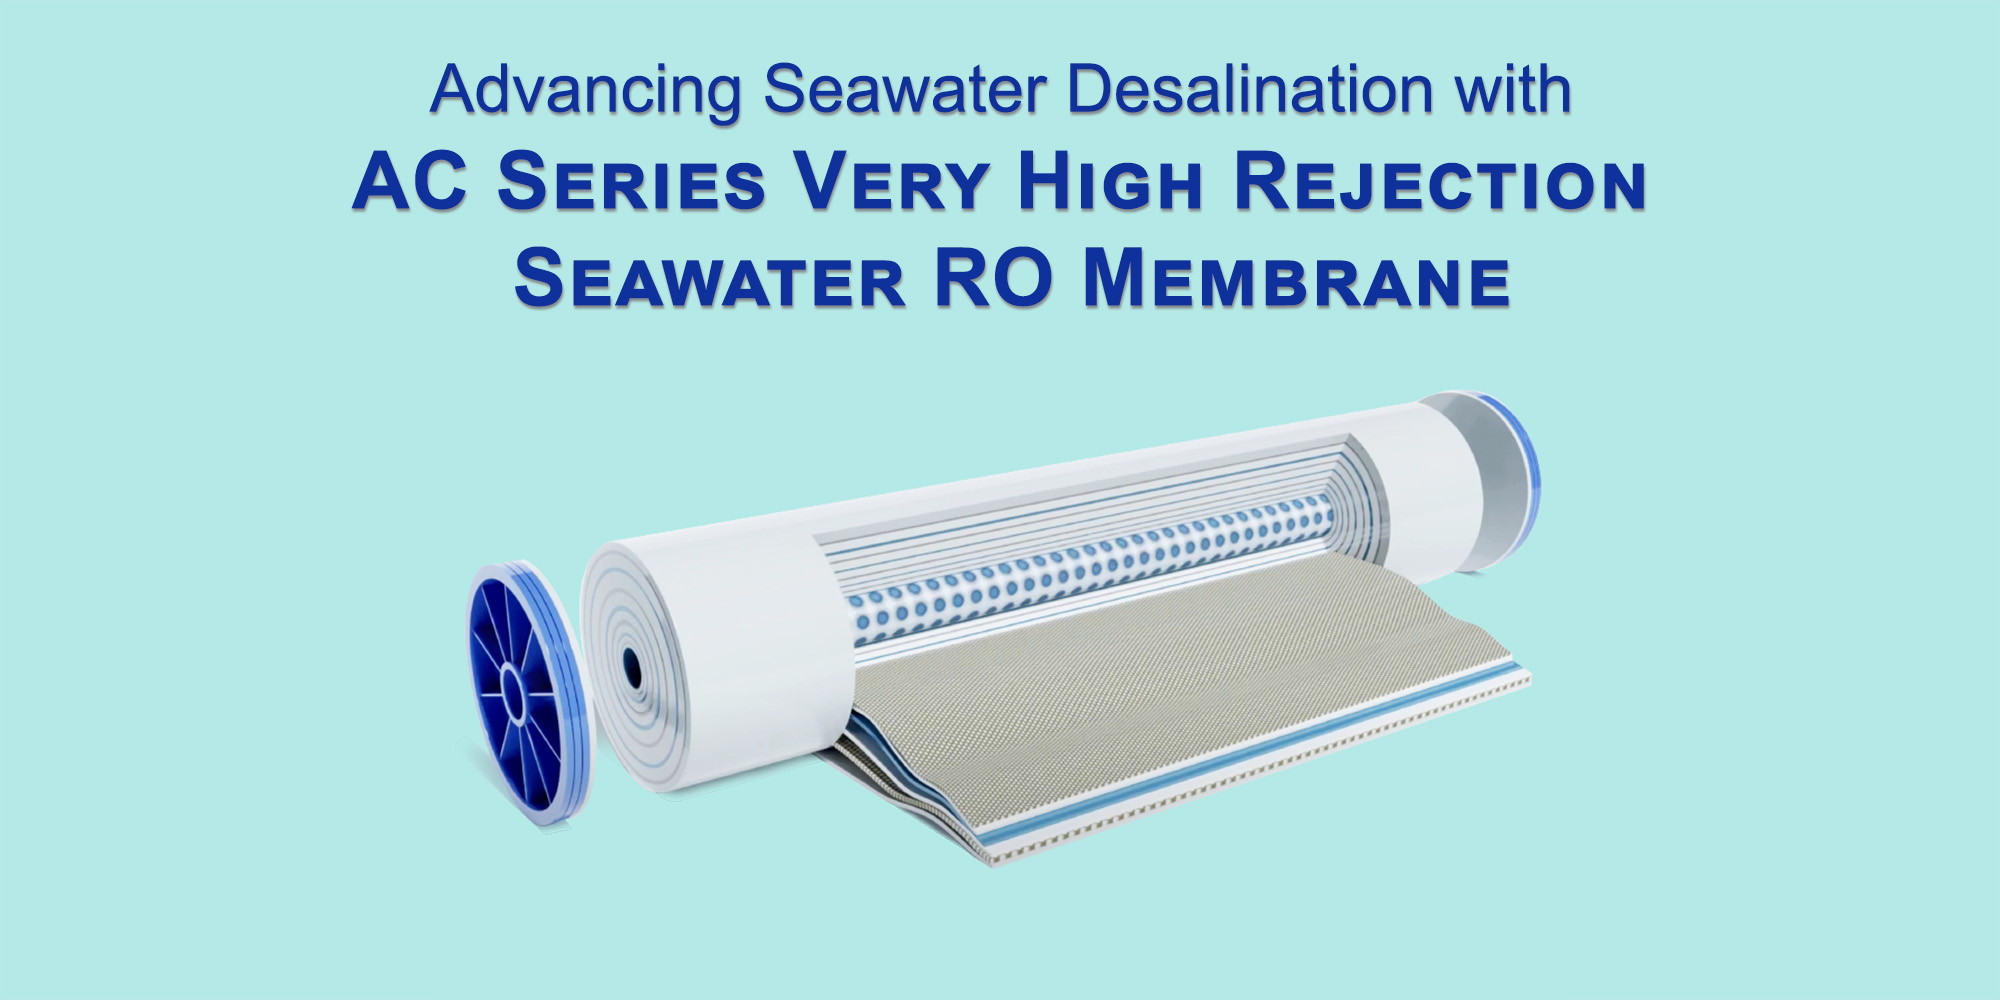 AC Series Very High Rejection Seawater RO Membrane